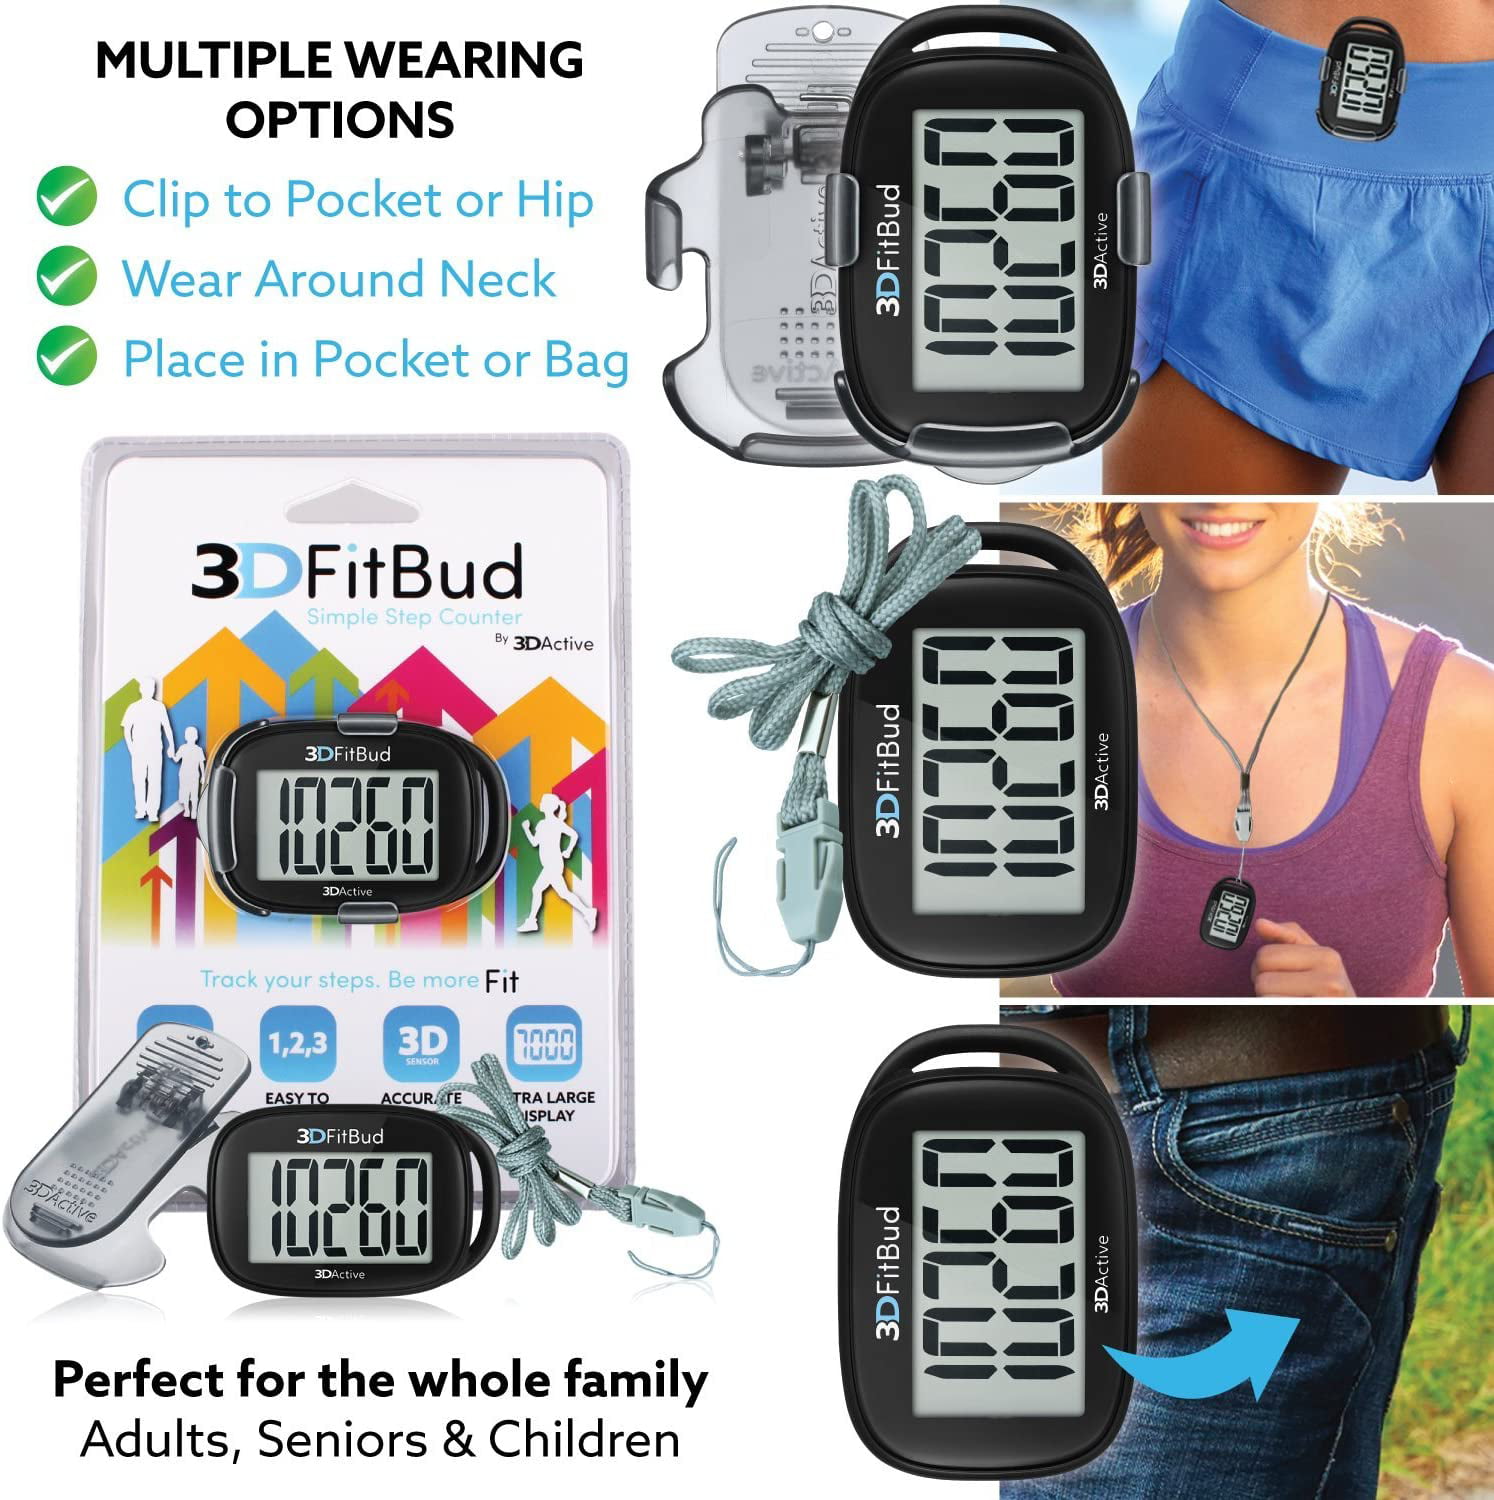 A420S 3DFitBud Simple Step Counter Walking 3D Pedometer with Lanyard Black 